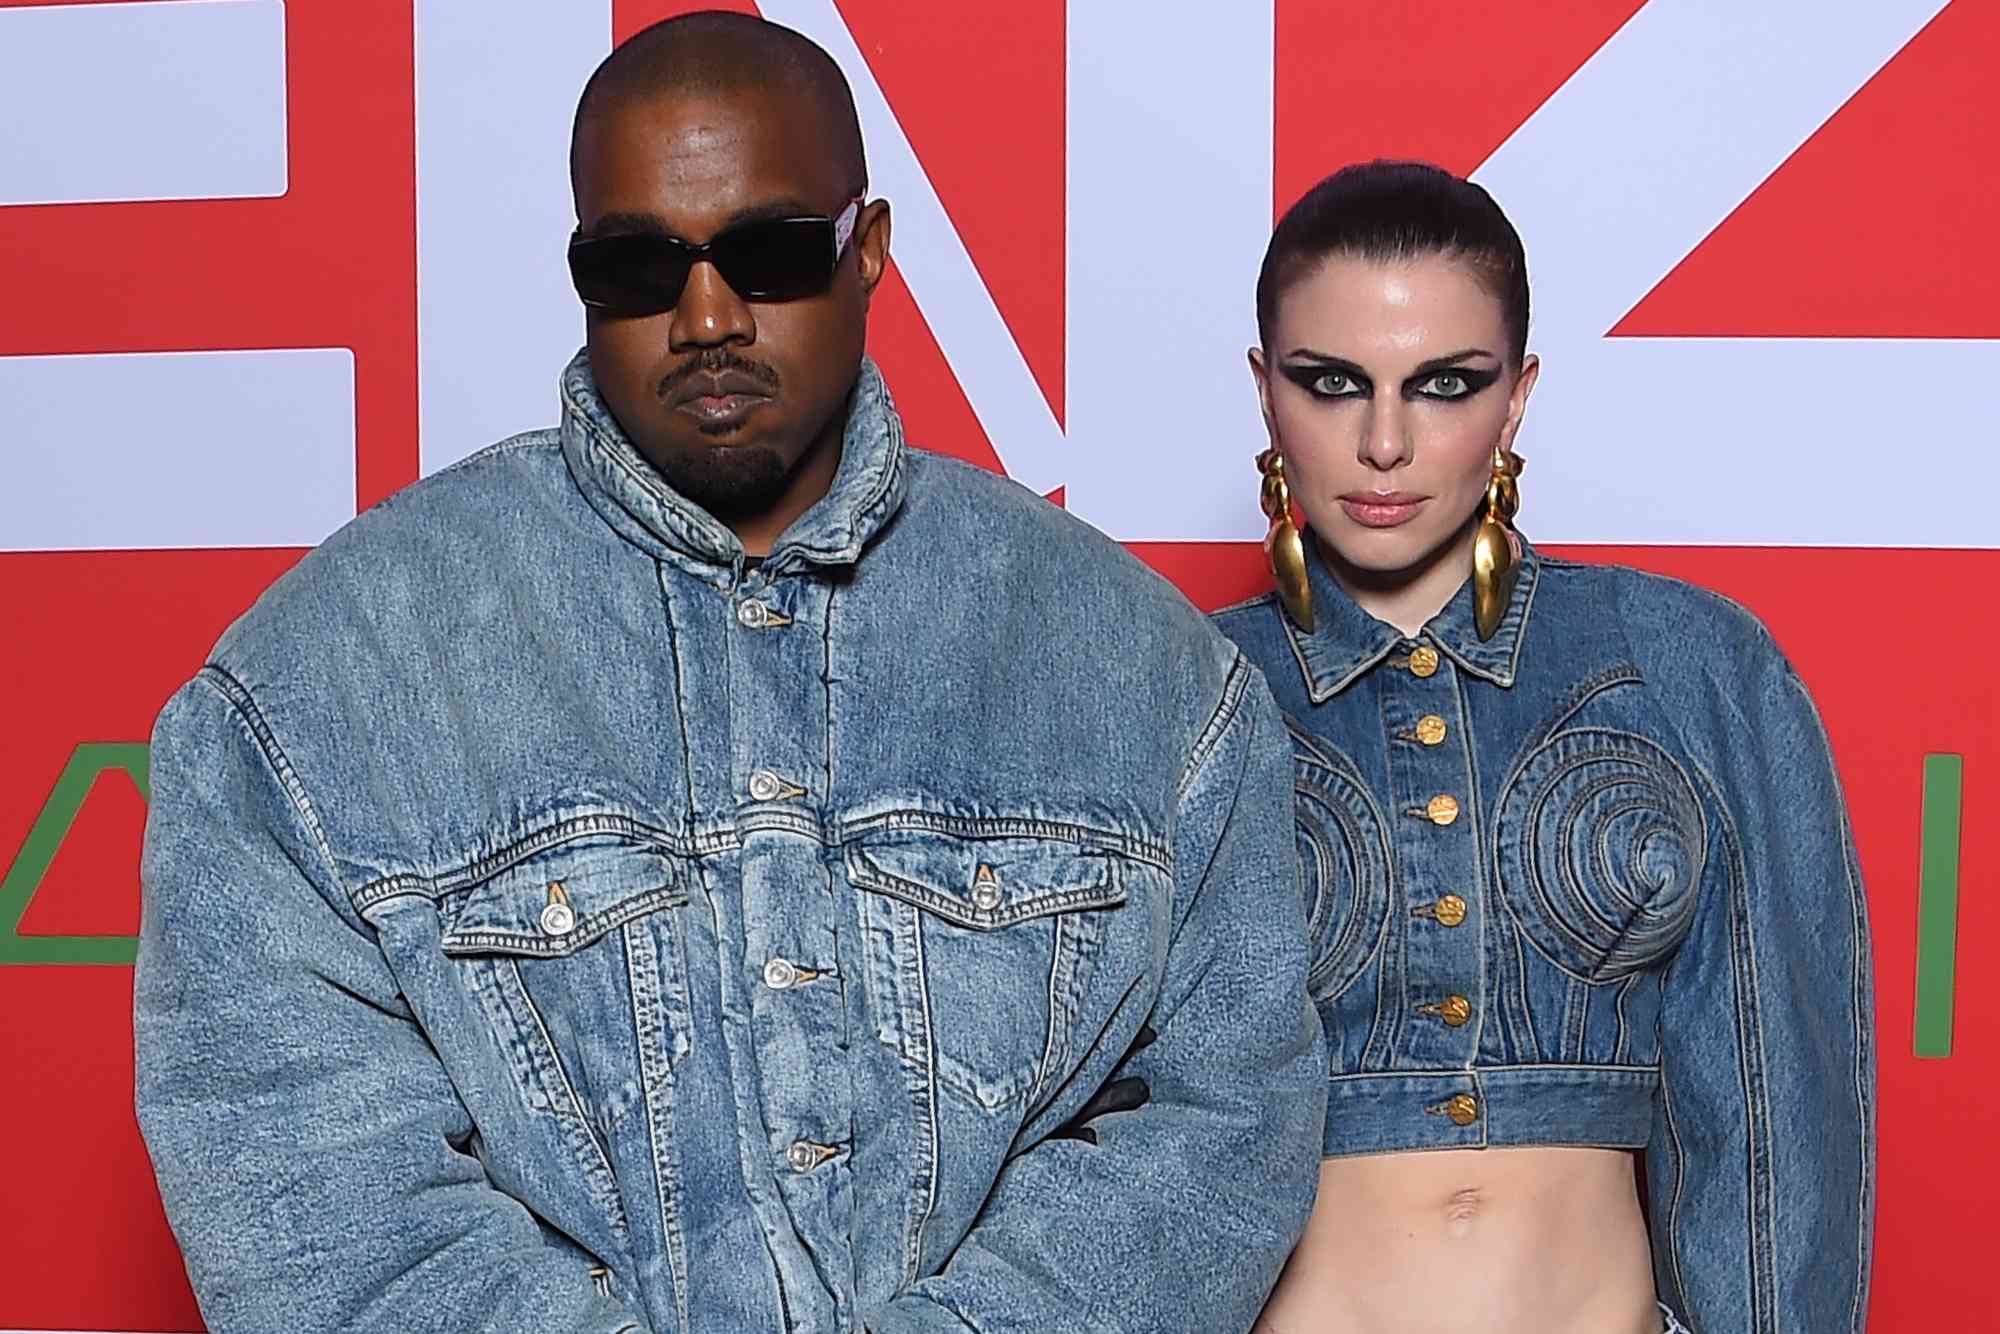 For Non-Editorial use please seek approval from Fashion House) Ye and Julia Fox attend the Kenzo Fall/Winter 2022/2023 show as part of Paris Fashion Week on January 23, 2022 in Paris, France.